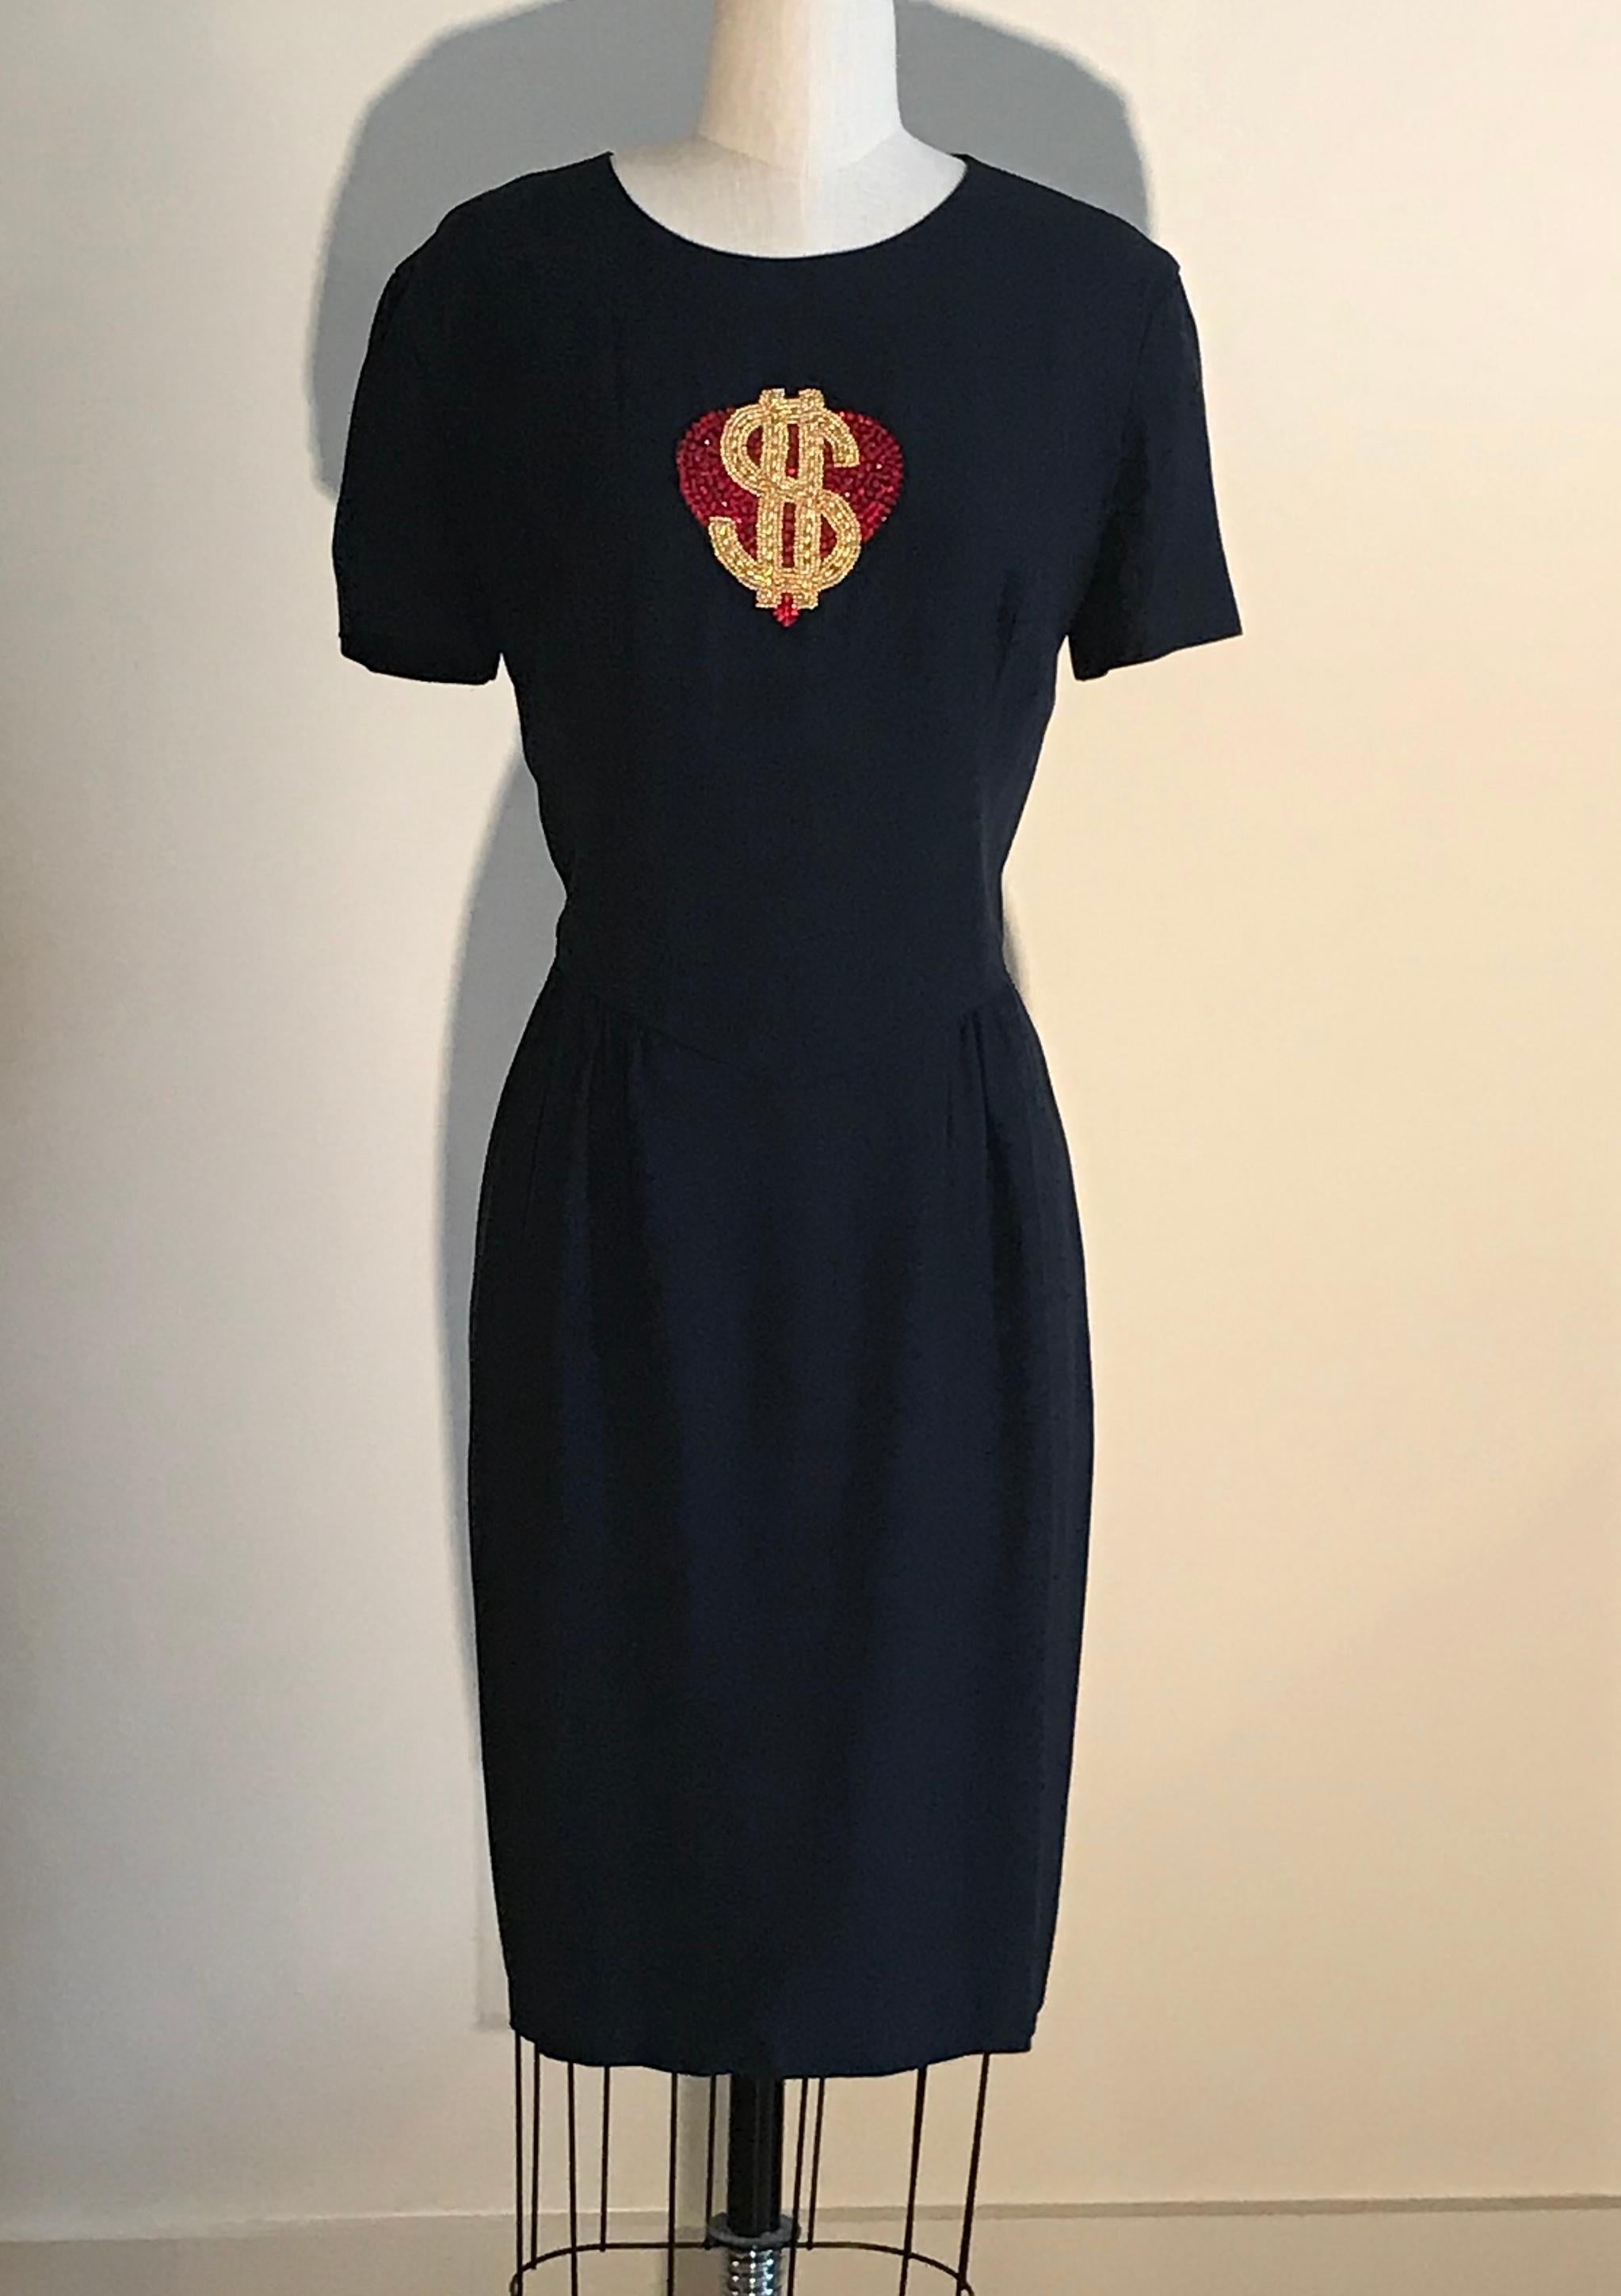 Vintage 1990s Moschino Couture navy blue short sleeved dress with beading at chest forming a red heart and gold dollar sign. Short sleeves, back zip.

55% acetate, 45% rayon.
Fully lined in 60% acetate, 40% rayon.

Made in Italy.

Labelled size IT